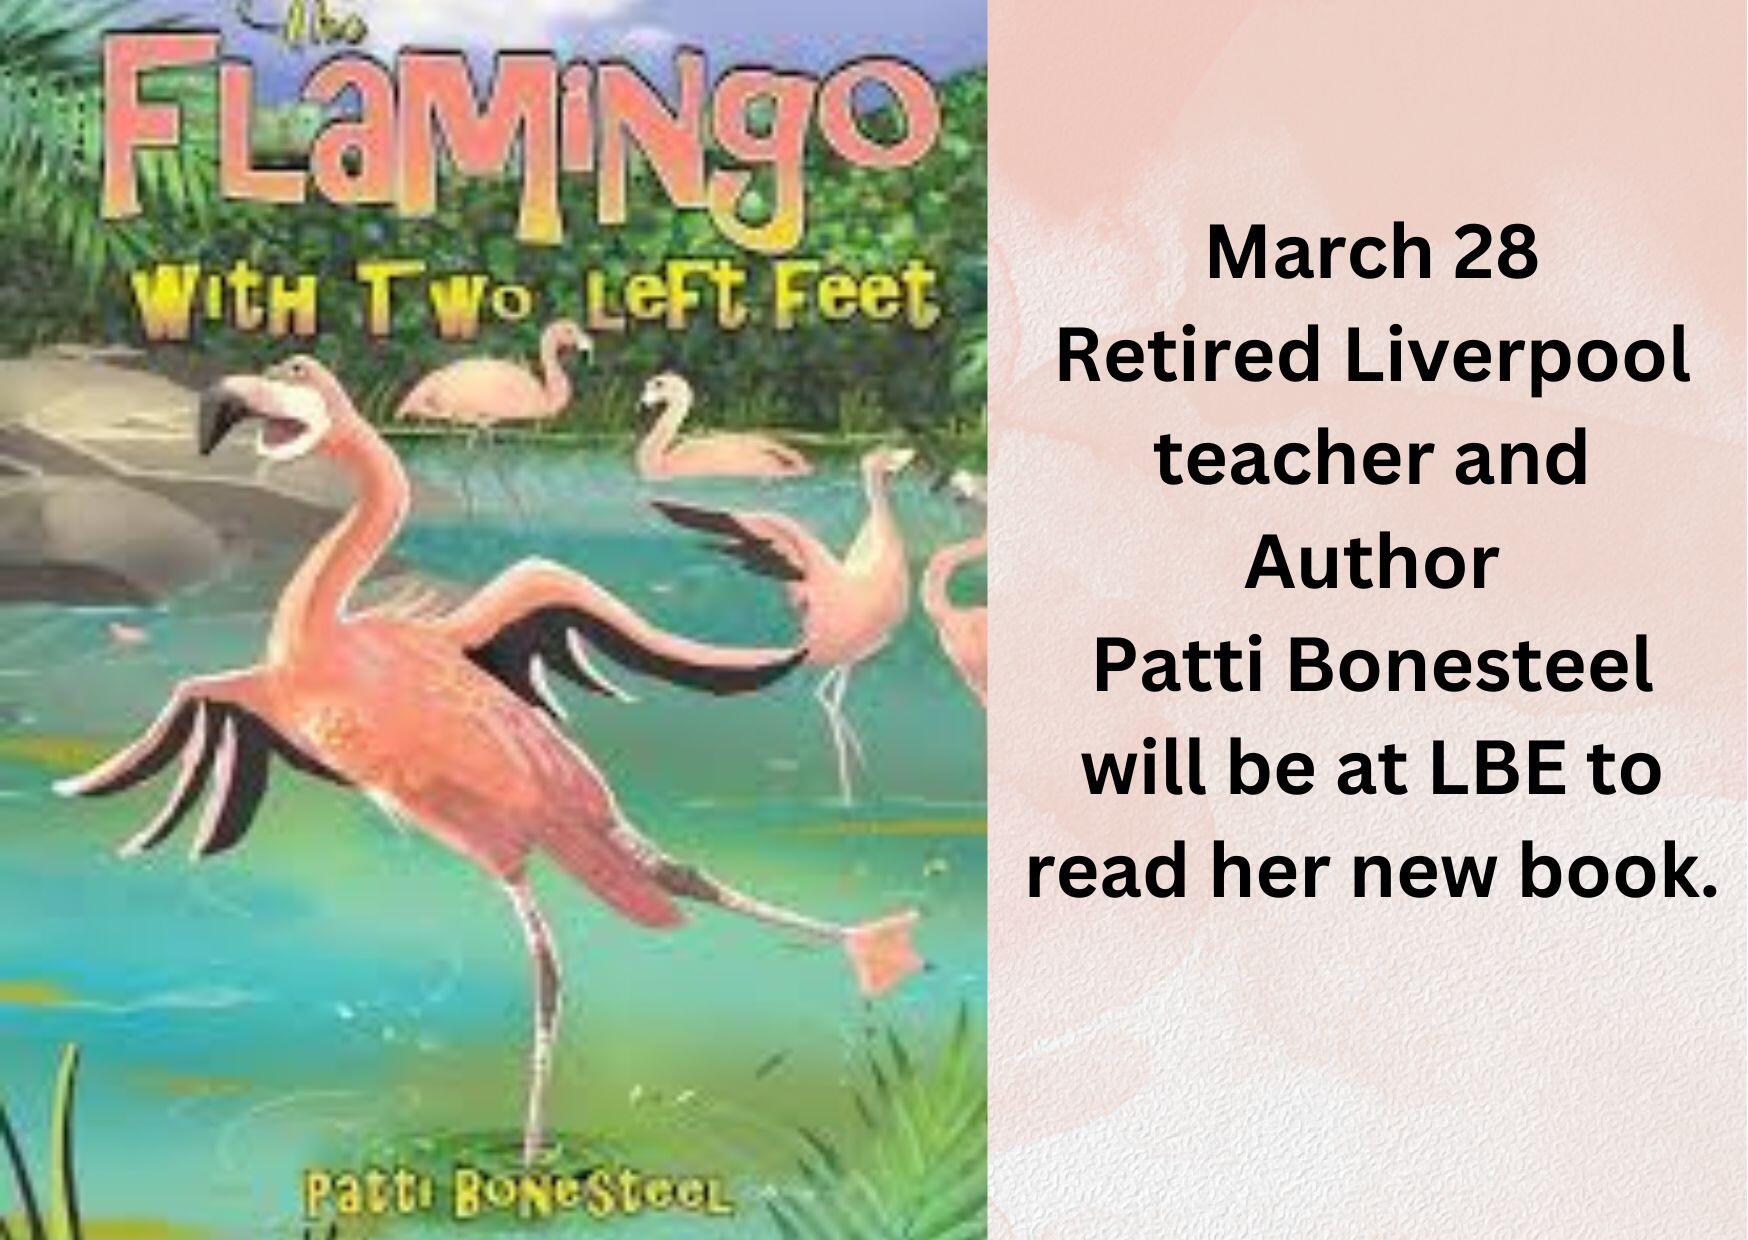 LBE Author Visit on March 28